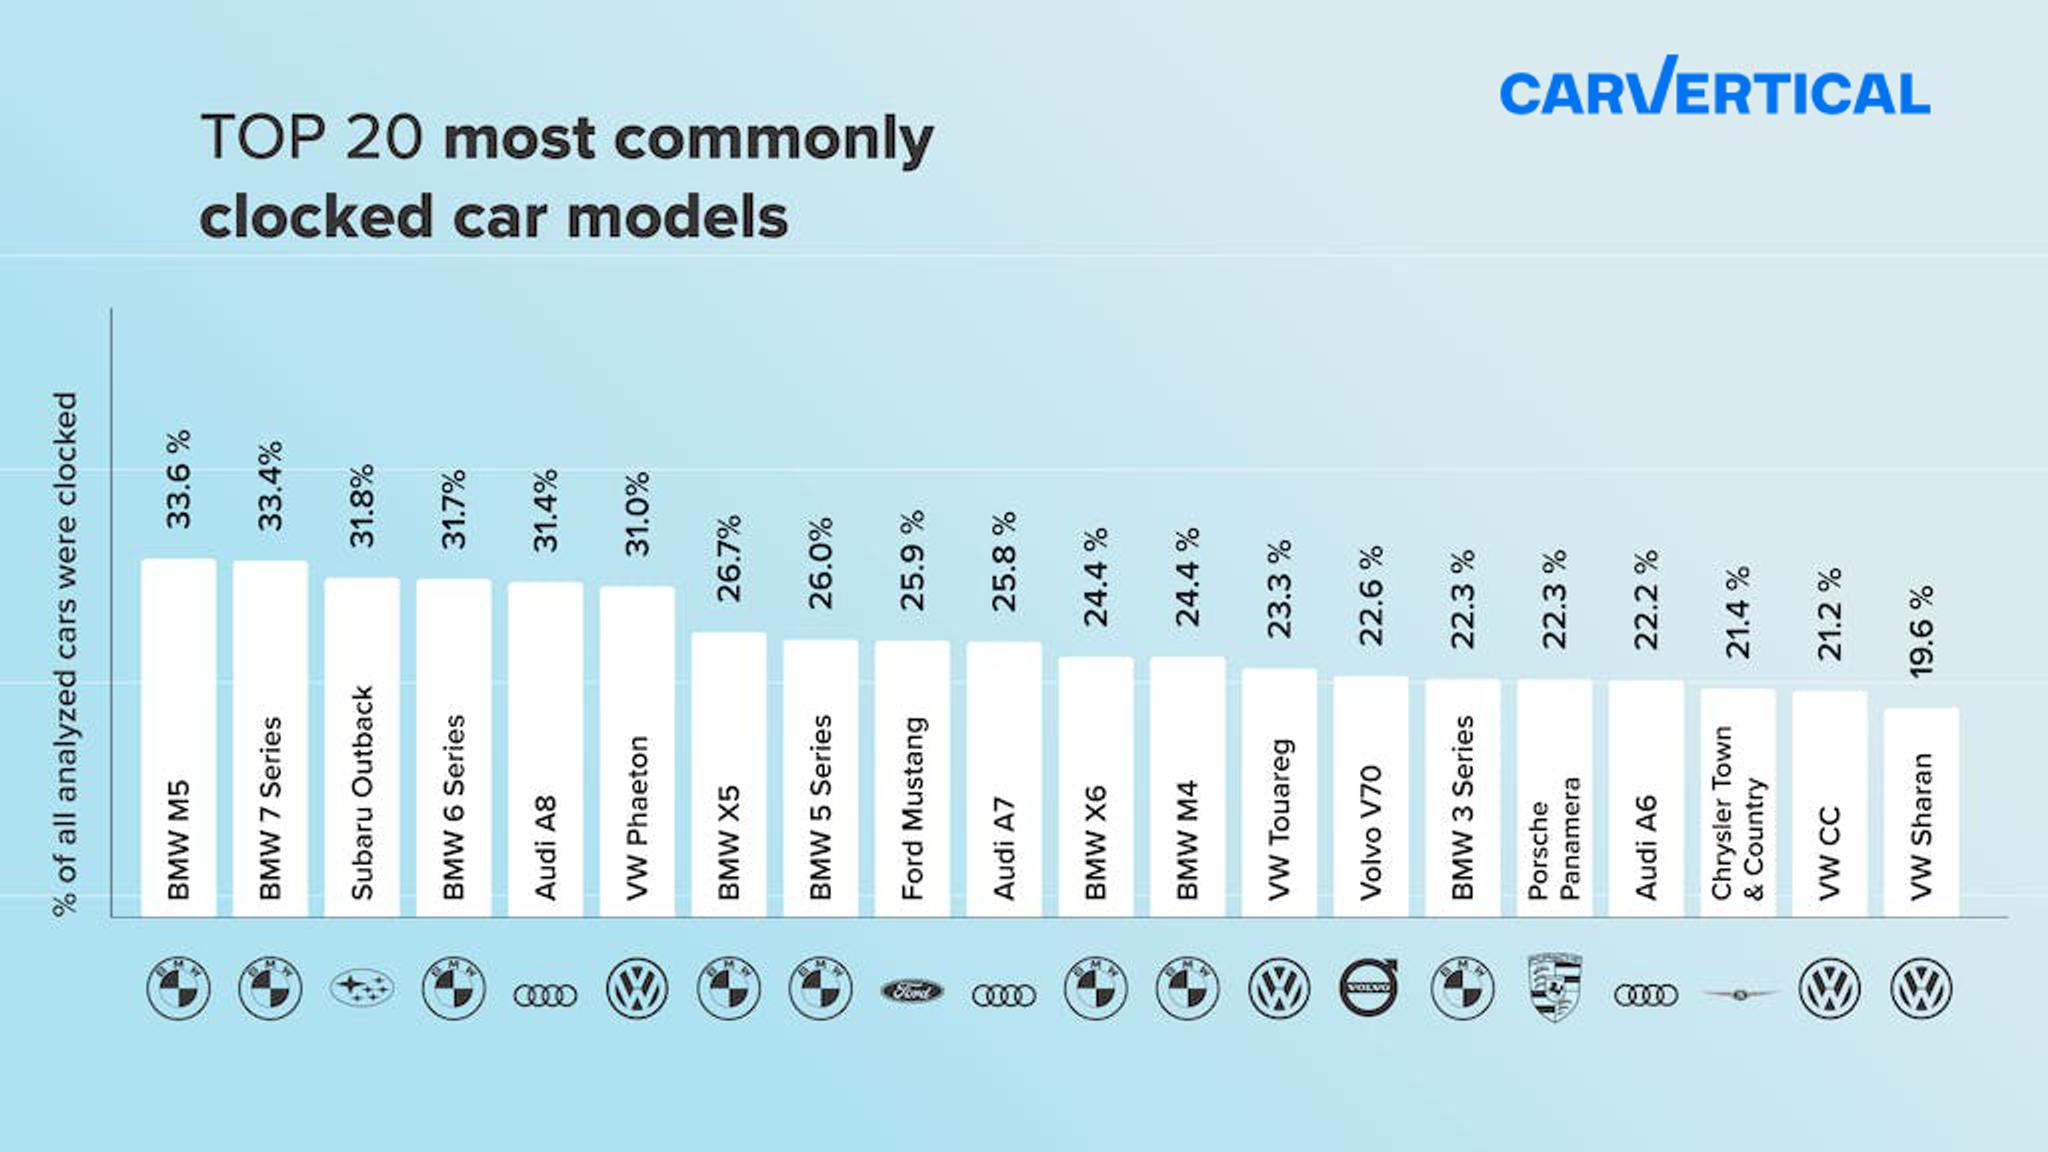 Top 20 most commonly clocked car models